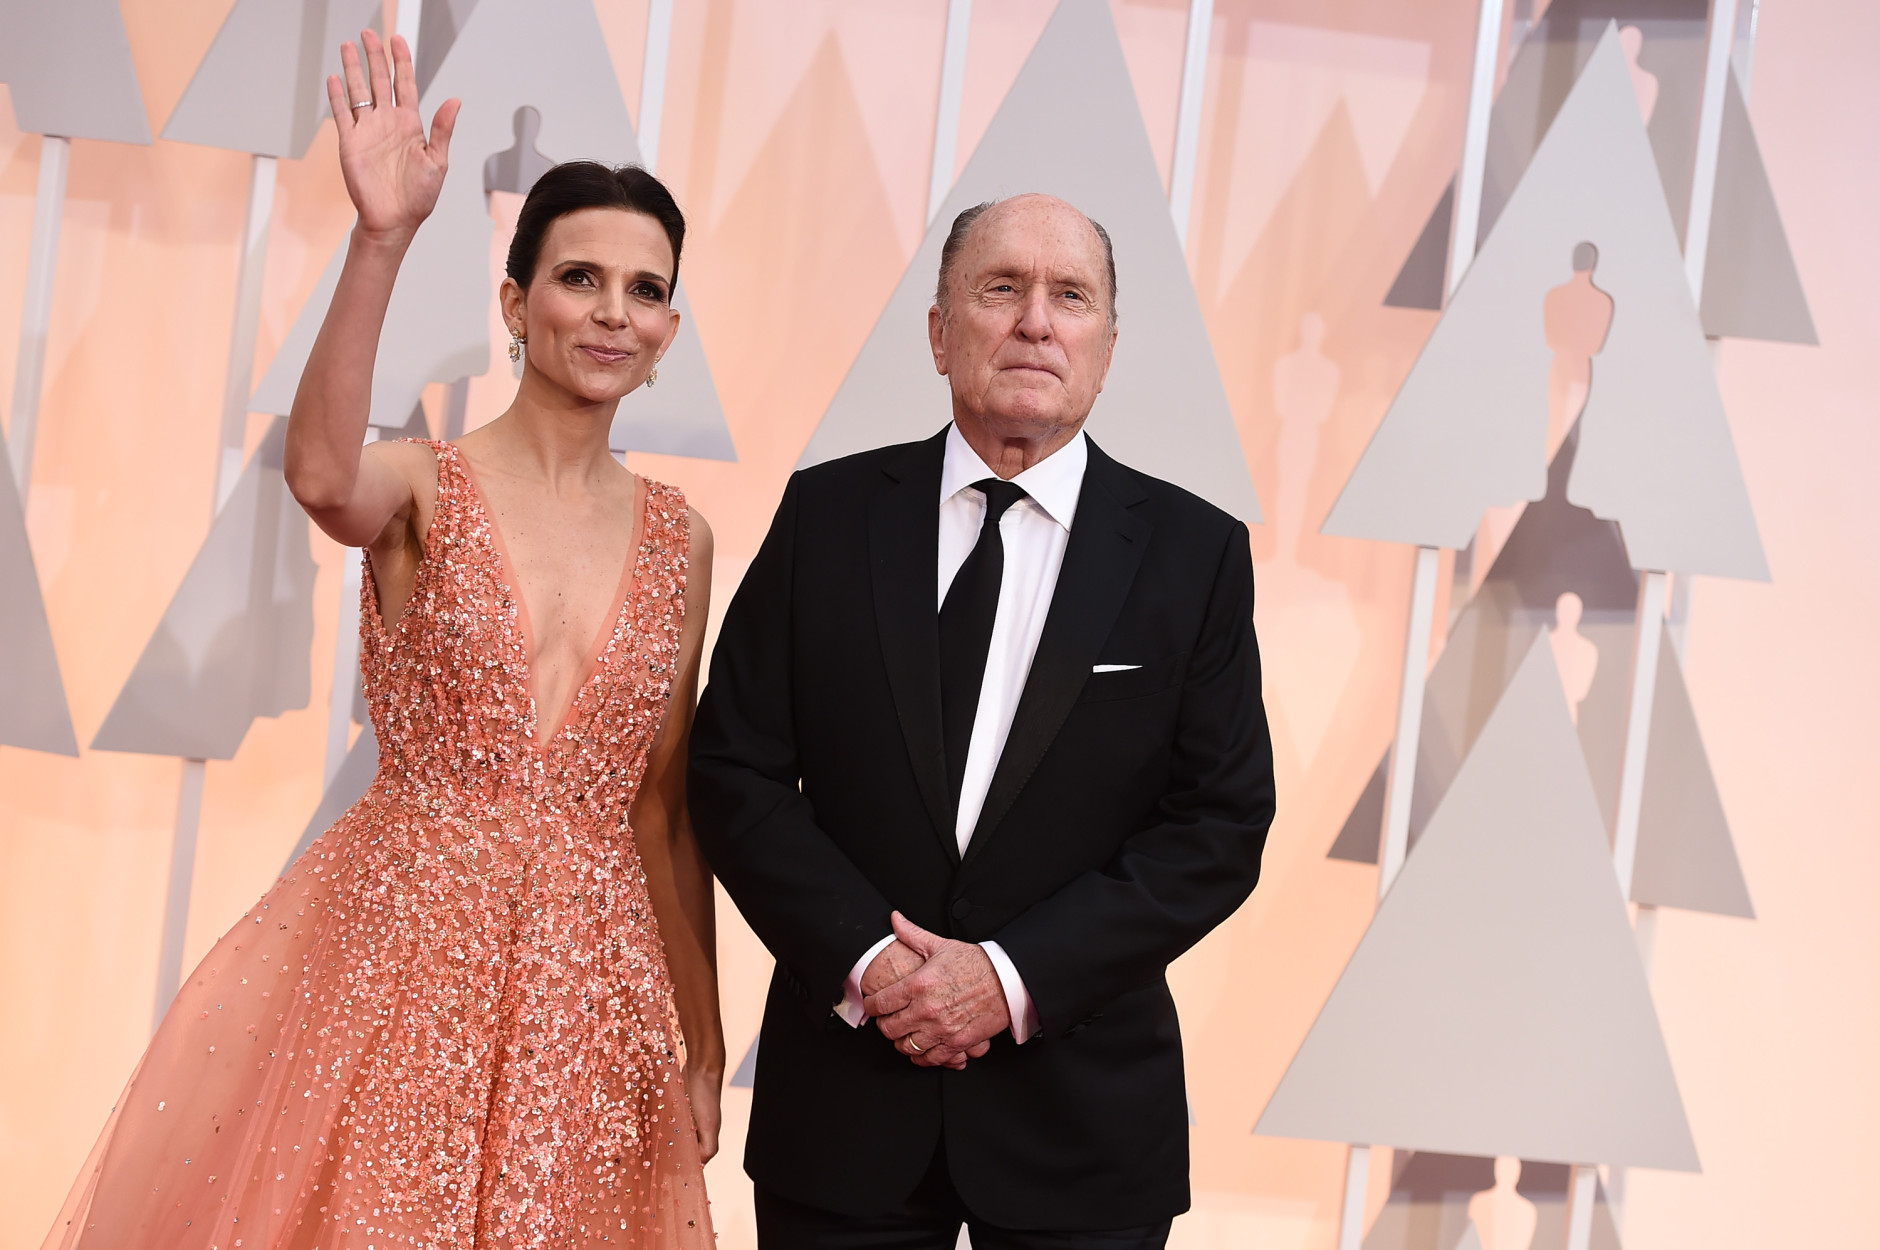 Luciana Duvall, left, and Robert Duvall arrive at the Oscars on Sunday, Feb. 22, 2015, at the Dolby Theatre in Los Angeles. (Photo by Jordan Strauss/Invision/AP)